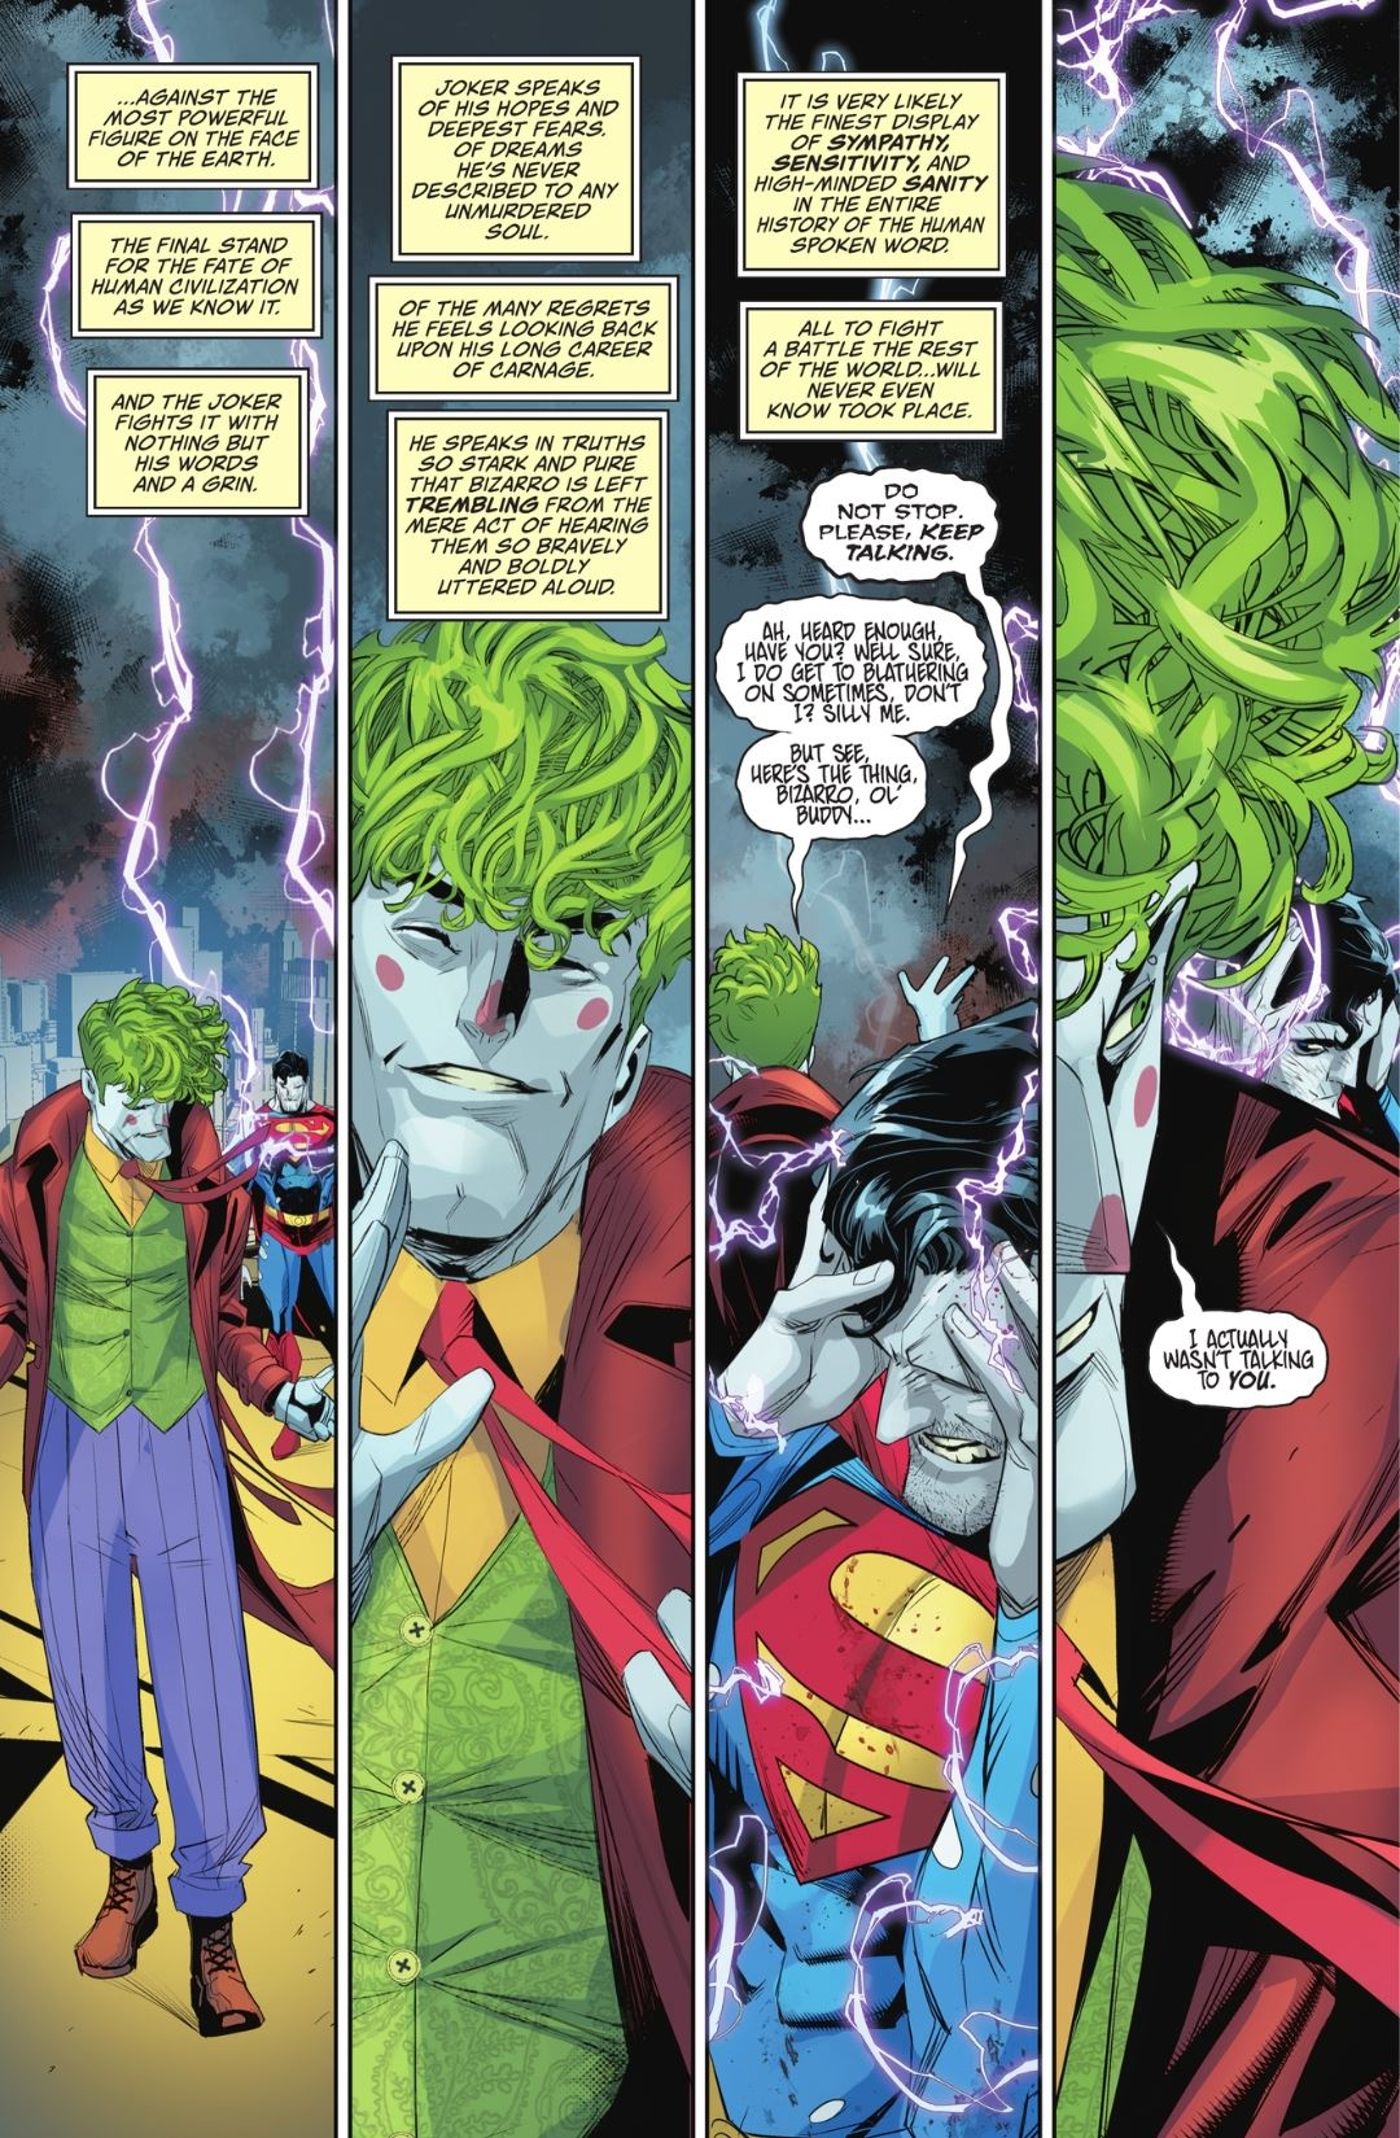 Joker’s Ultimate Form Just Saved the DC Universe